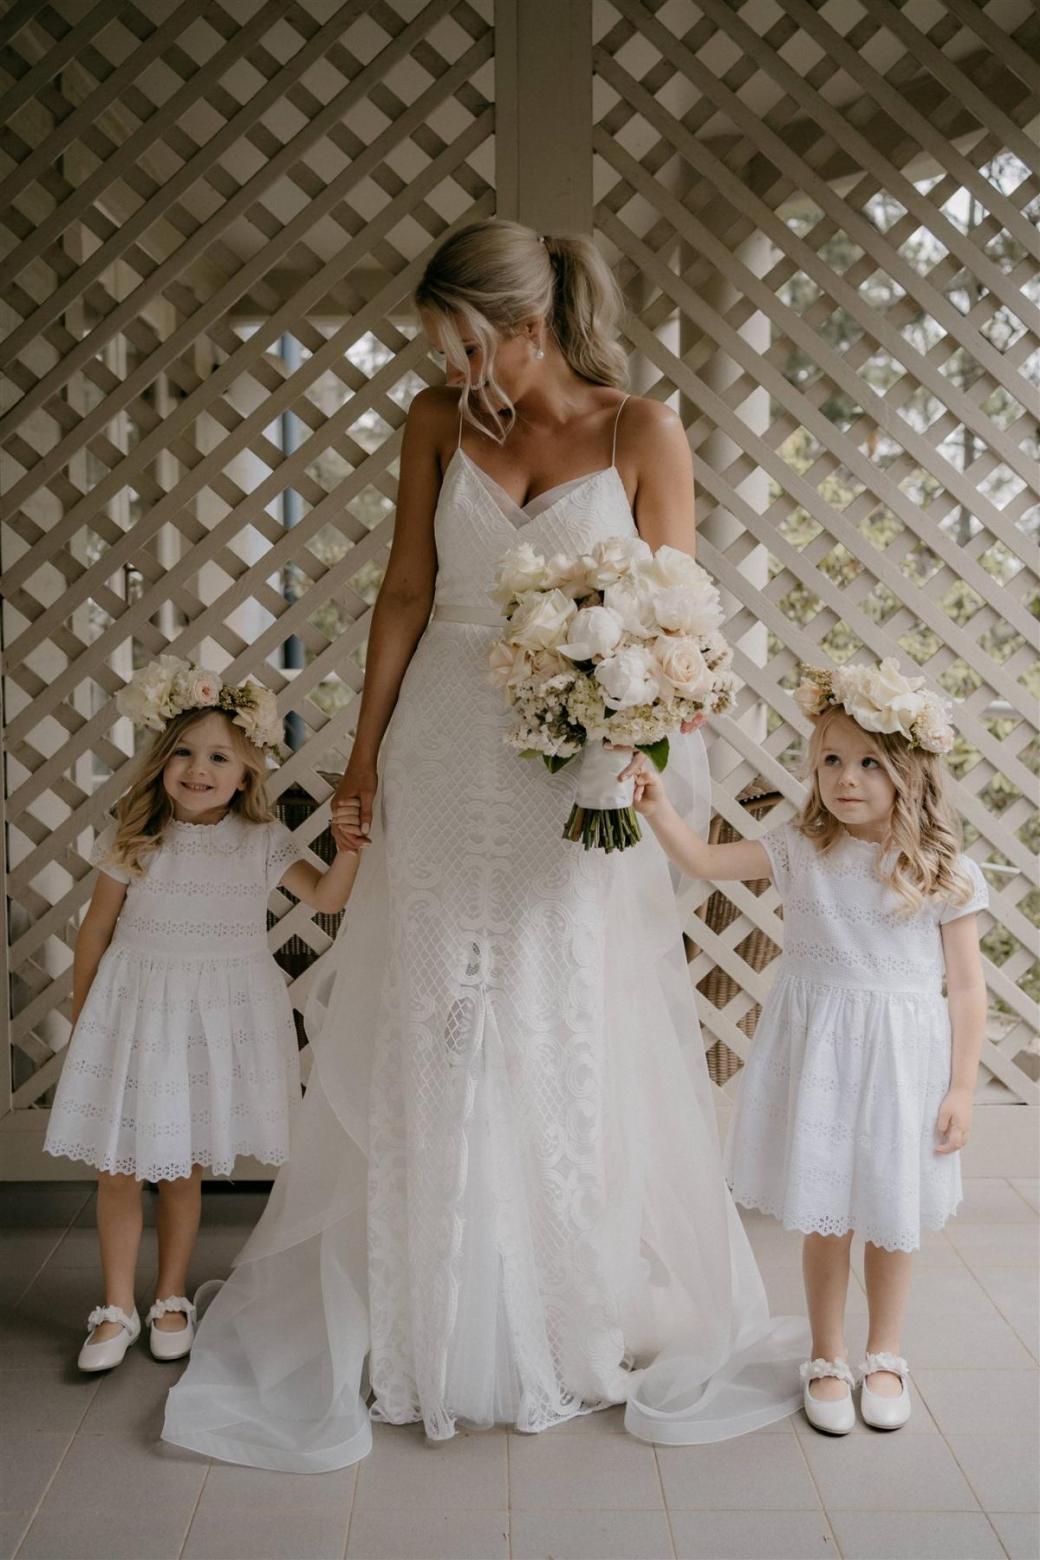 KWH bride Ashleigh with her two flower girls, holding her pink and white florals wearing the Elodie gown, a lattice lace wedding dress with spaghetti straps.